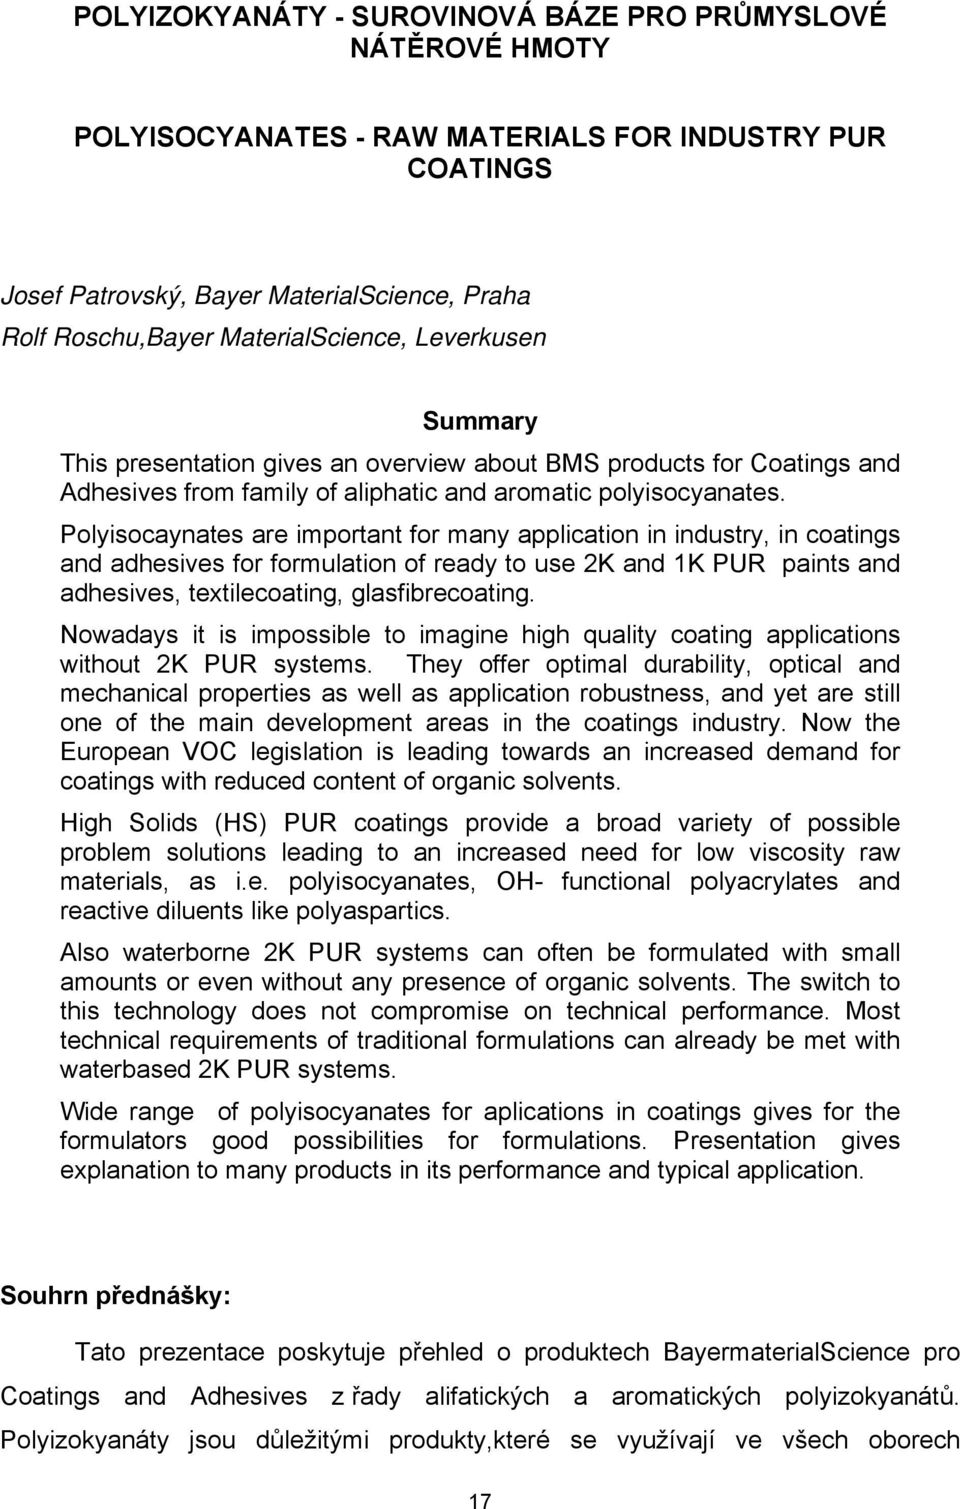 Polyisocaynates are important for many application in industry, in coatings and adhesives for formulation of ready to use 2K and 1K PUR paints and adhesives, textilecoating, glasfibrecoating.